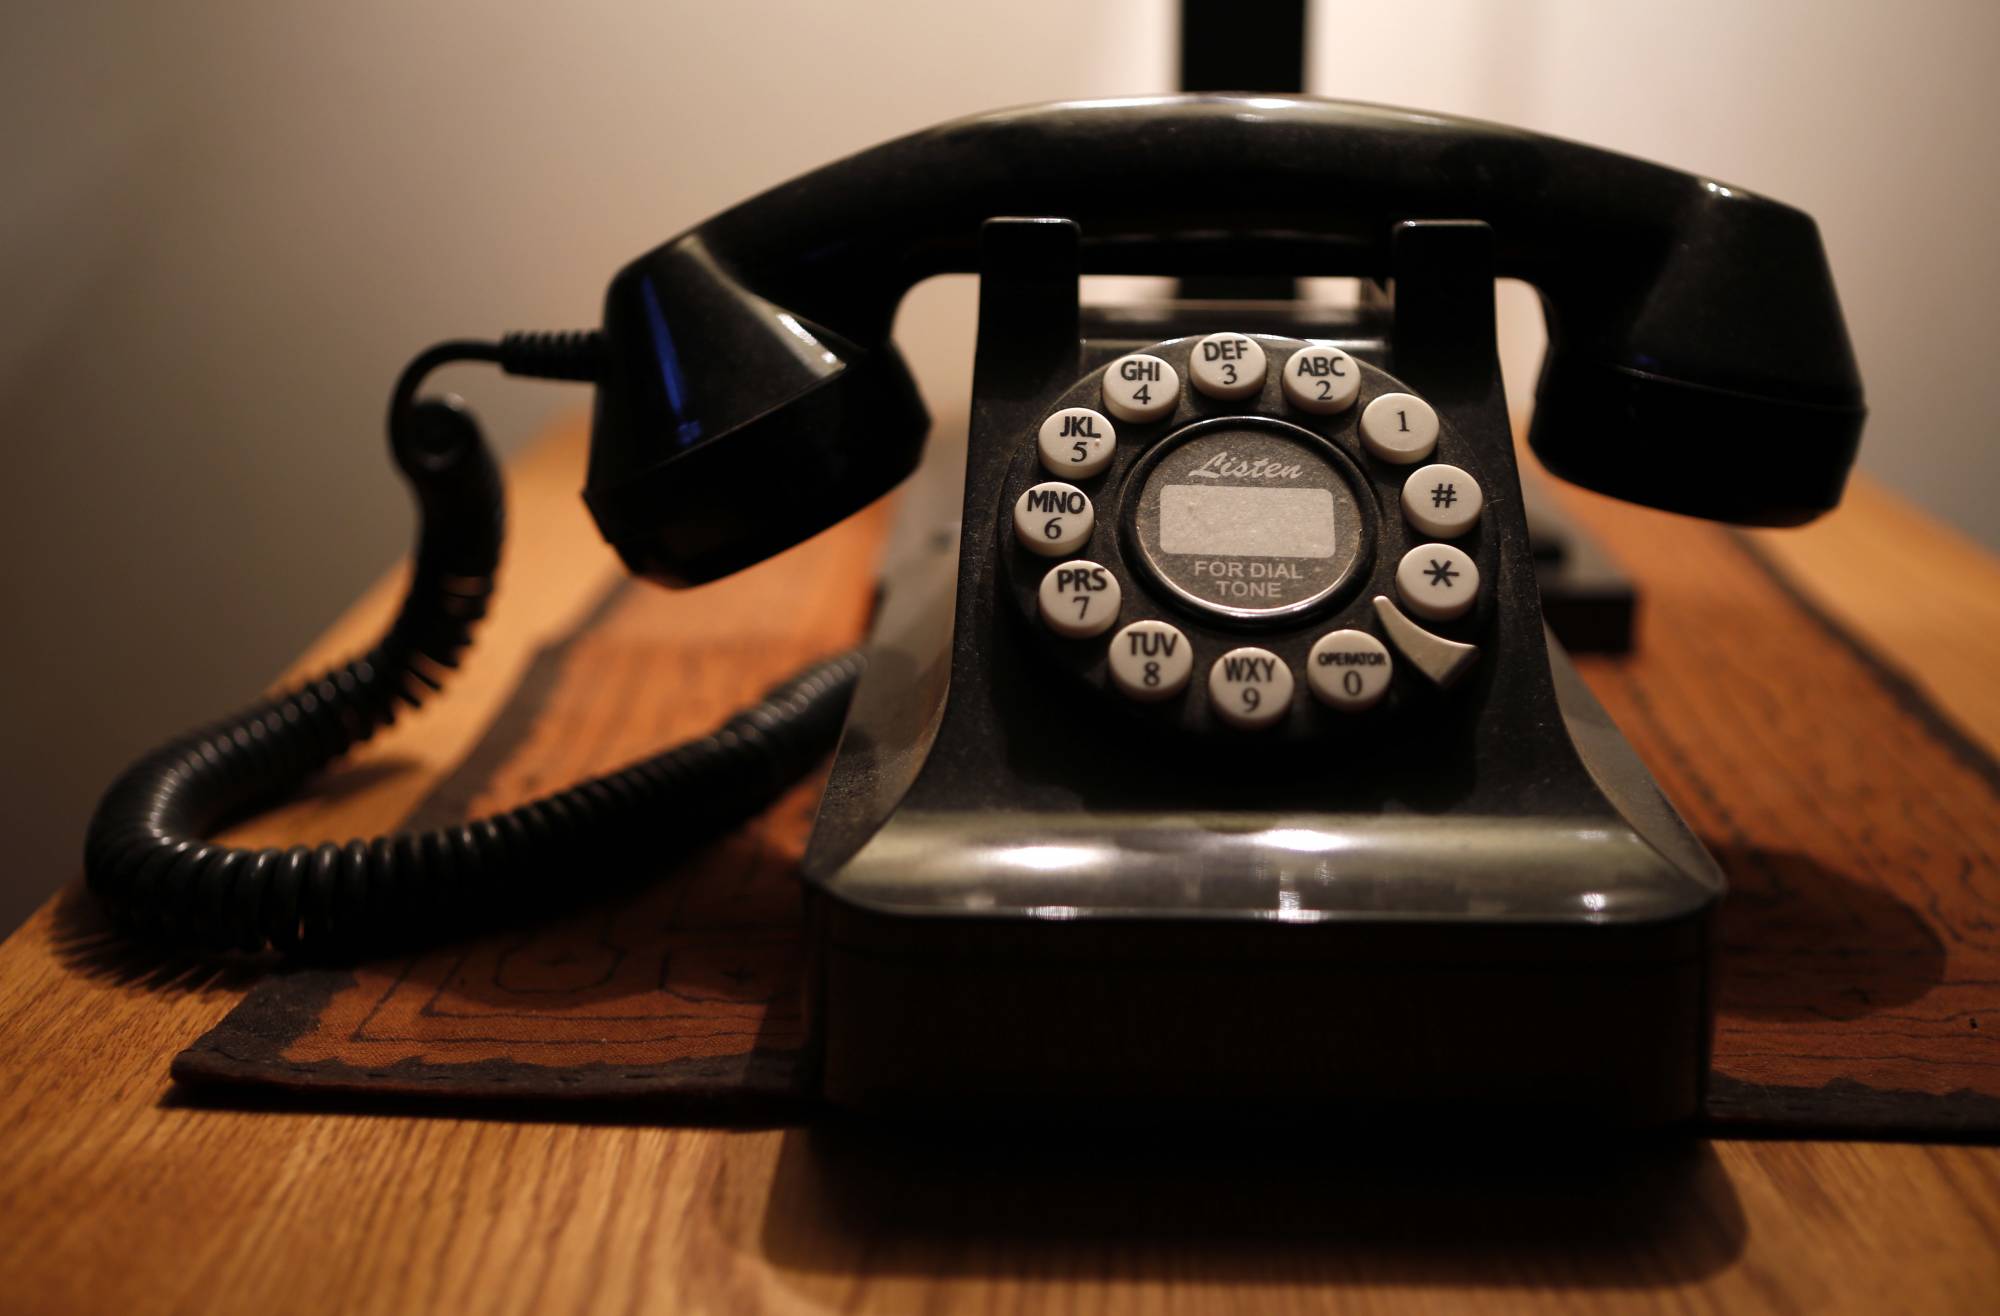 FILE - This Wednesday, April 14, 2016, file photo, shows a push-button landline telephone, in Whitefield, Maine. According to a U.S. government survey released Thursday, May 4, 2017, homes and apartments with only cellphone service exceeded 50 percent for the first time, reaching 50.8 percent for the last six months of 2016. On the flip side, 45.9 percent of U.S. households still have landline phones, including newer internet-based services common with cable TV and internet packages, while the remaining households have no phone service at all. More than 39 percent of U.S. households have both landline and cellphone service. (AP Photo/Robert F. Bukaty, File)